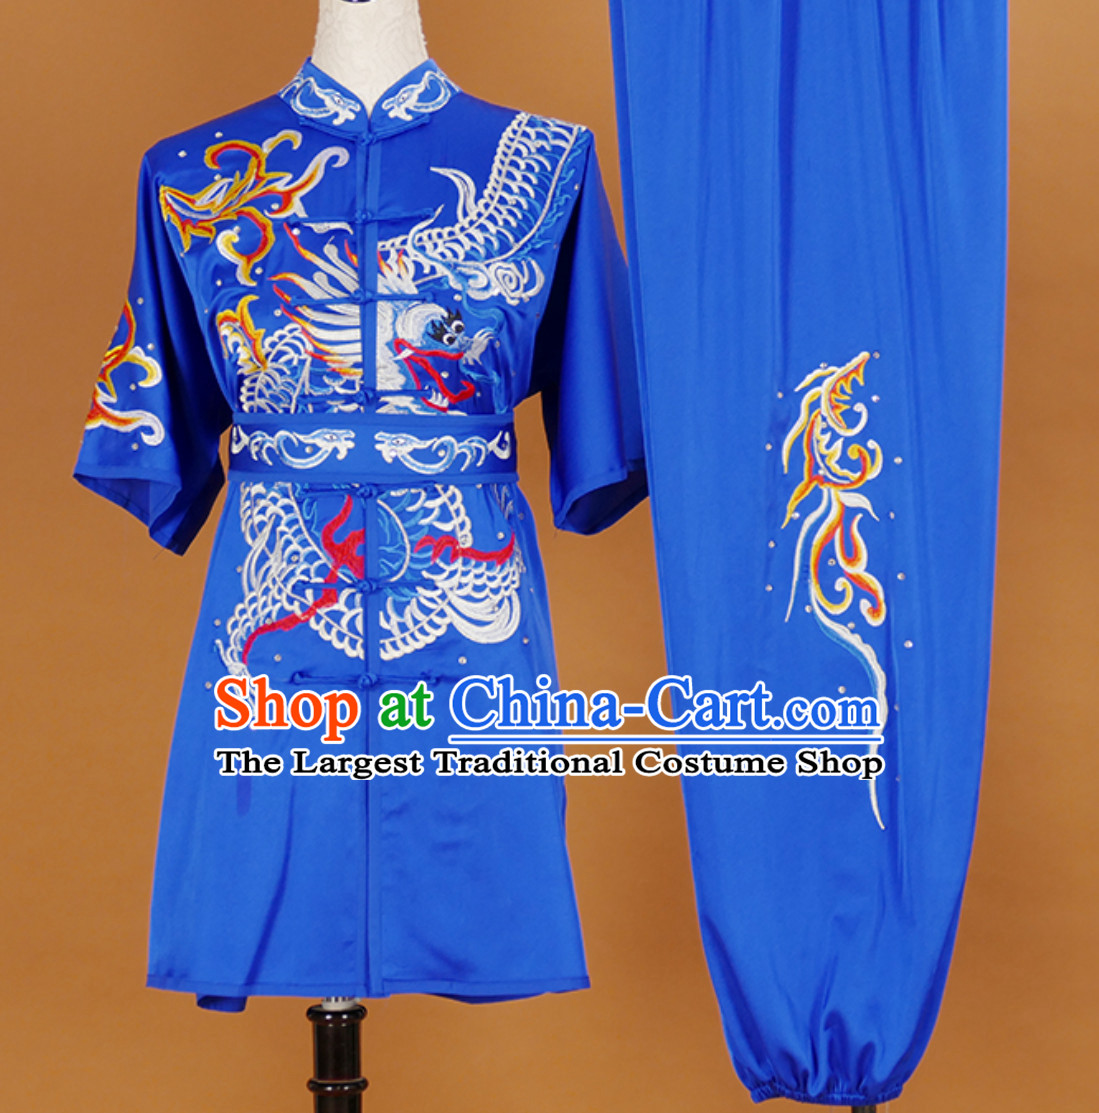 Blue Short Sleeves Martial Arts Suit Kung Fu Dress Wushu Suits Stage Performance Competition Full Set